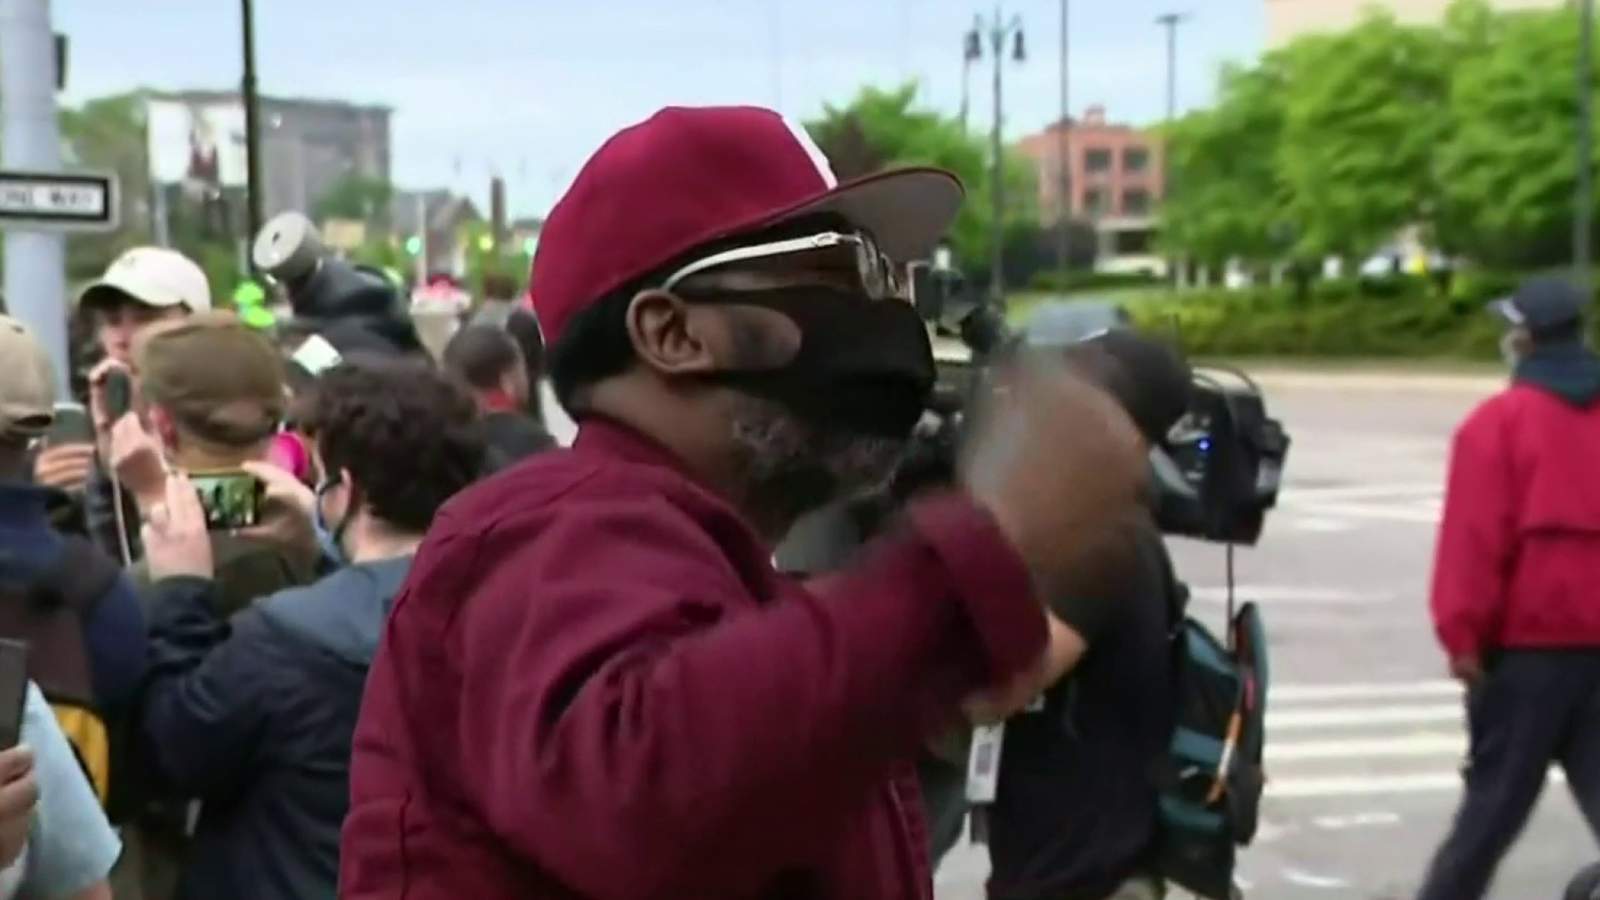 Detroit authorities, community leaders working together to keep protests peaceful